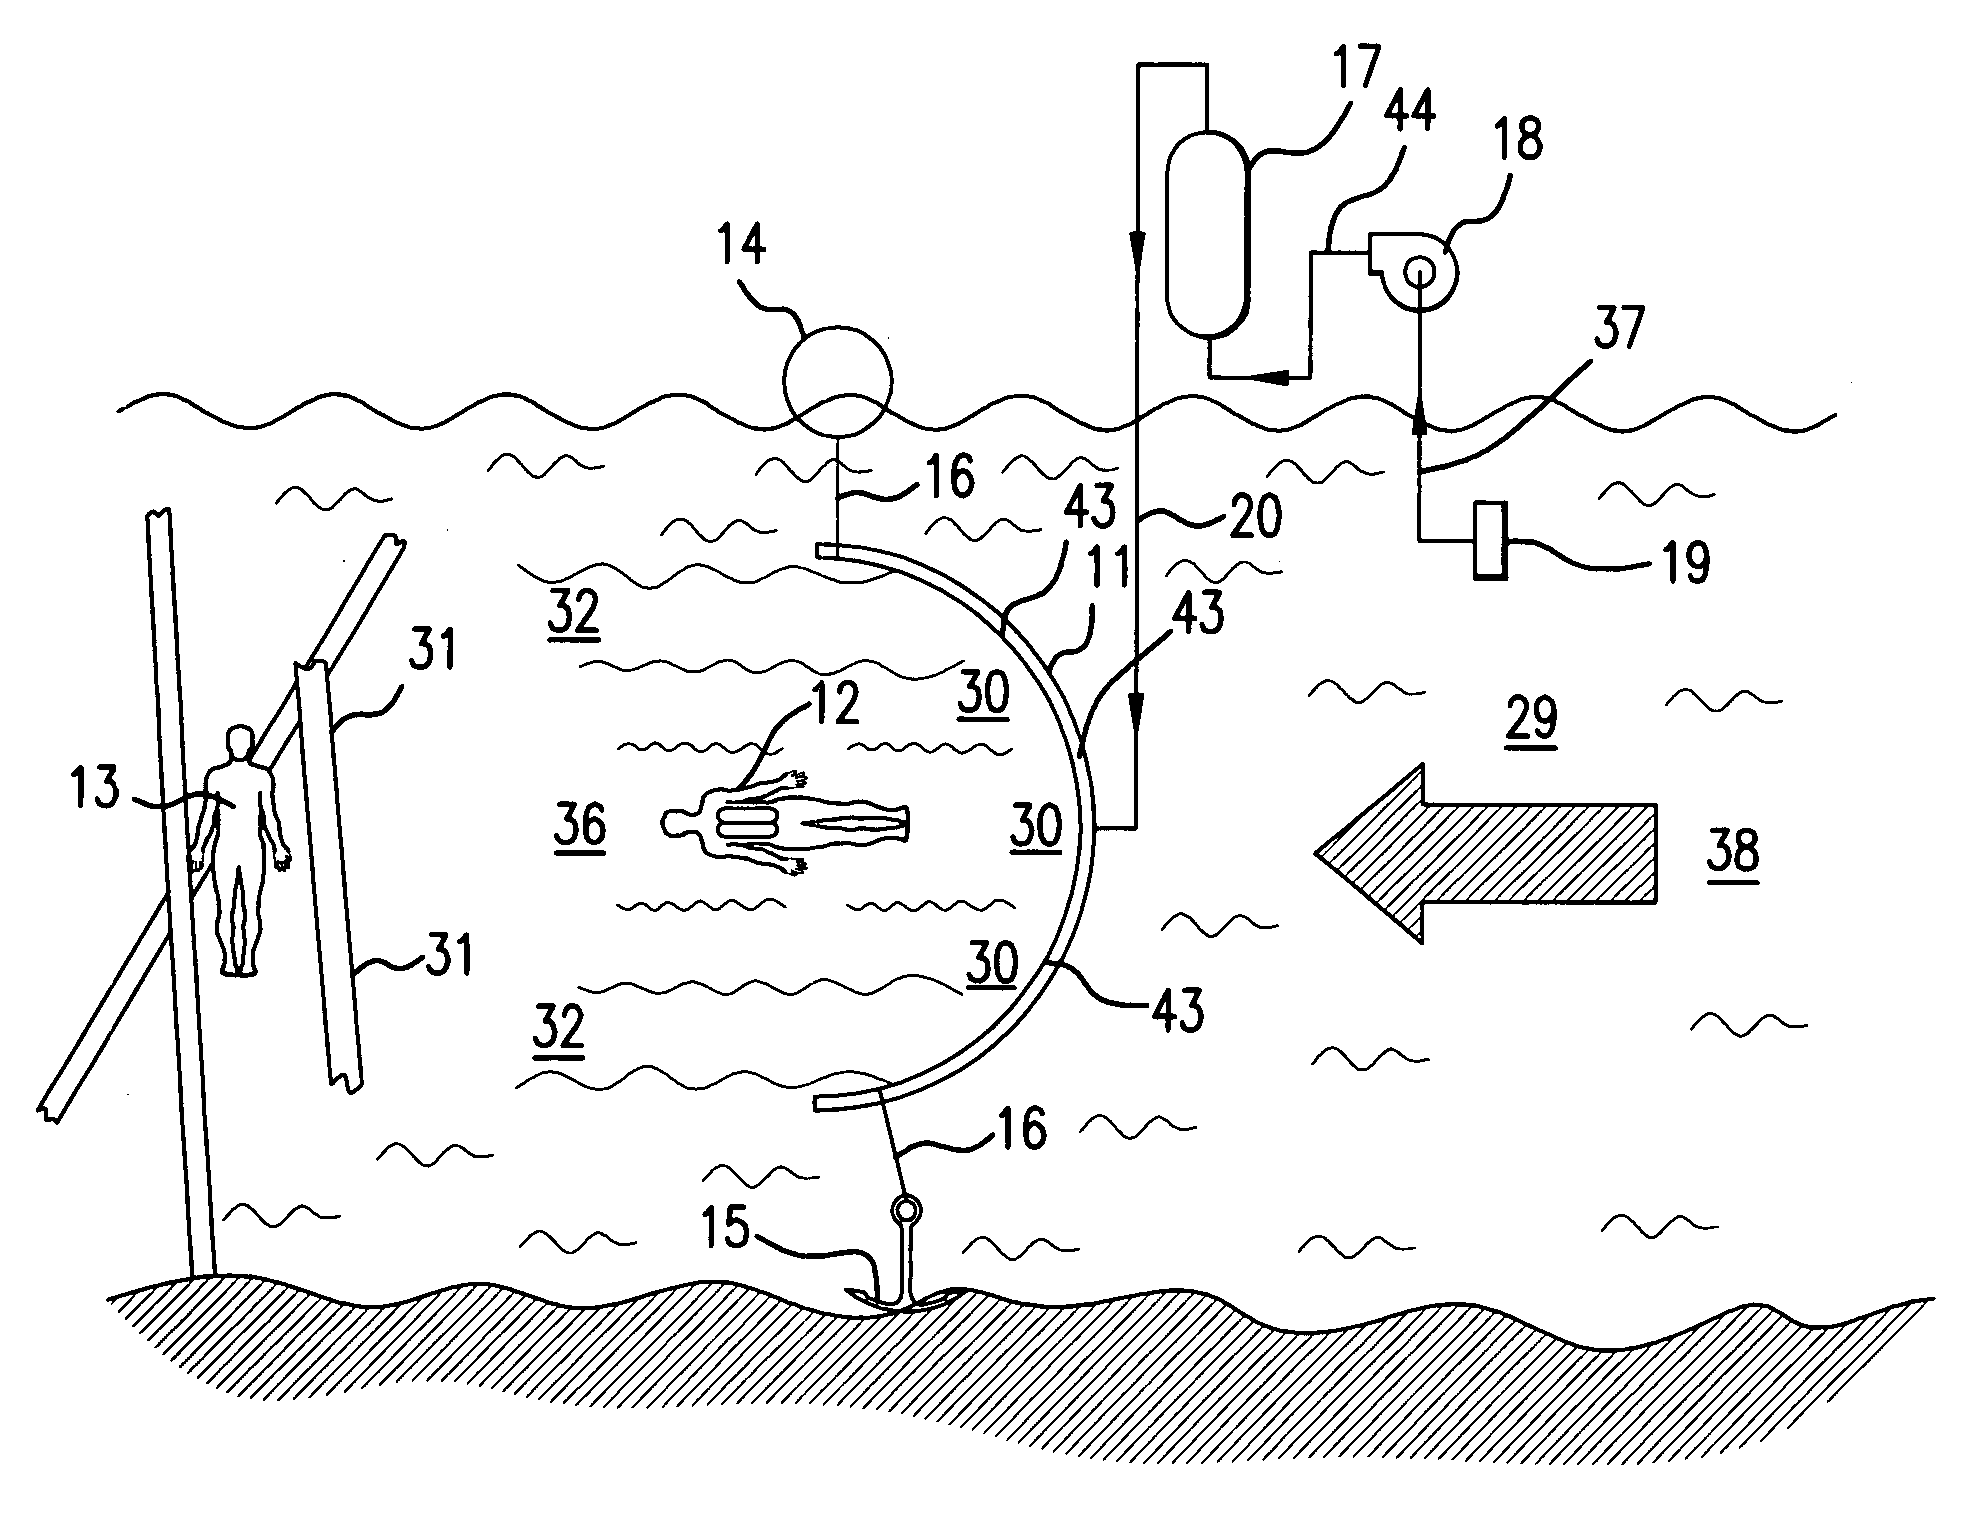 Fluid injection deflector shield viewing apparatus and method